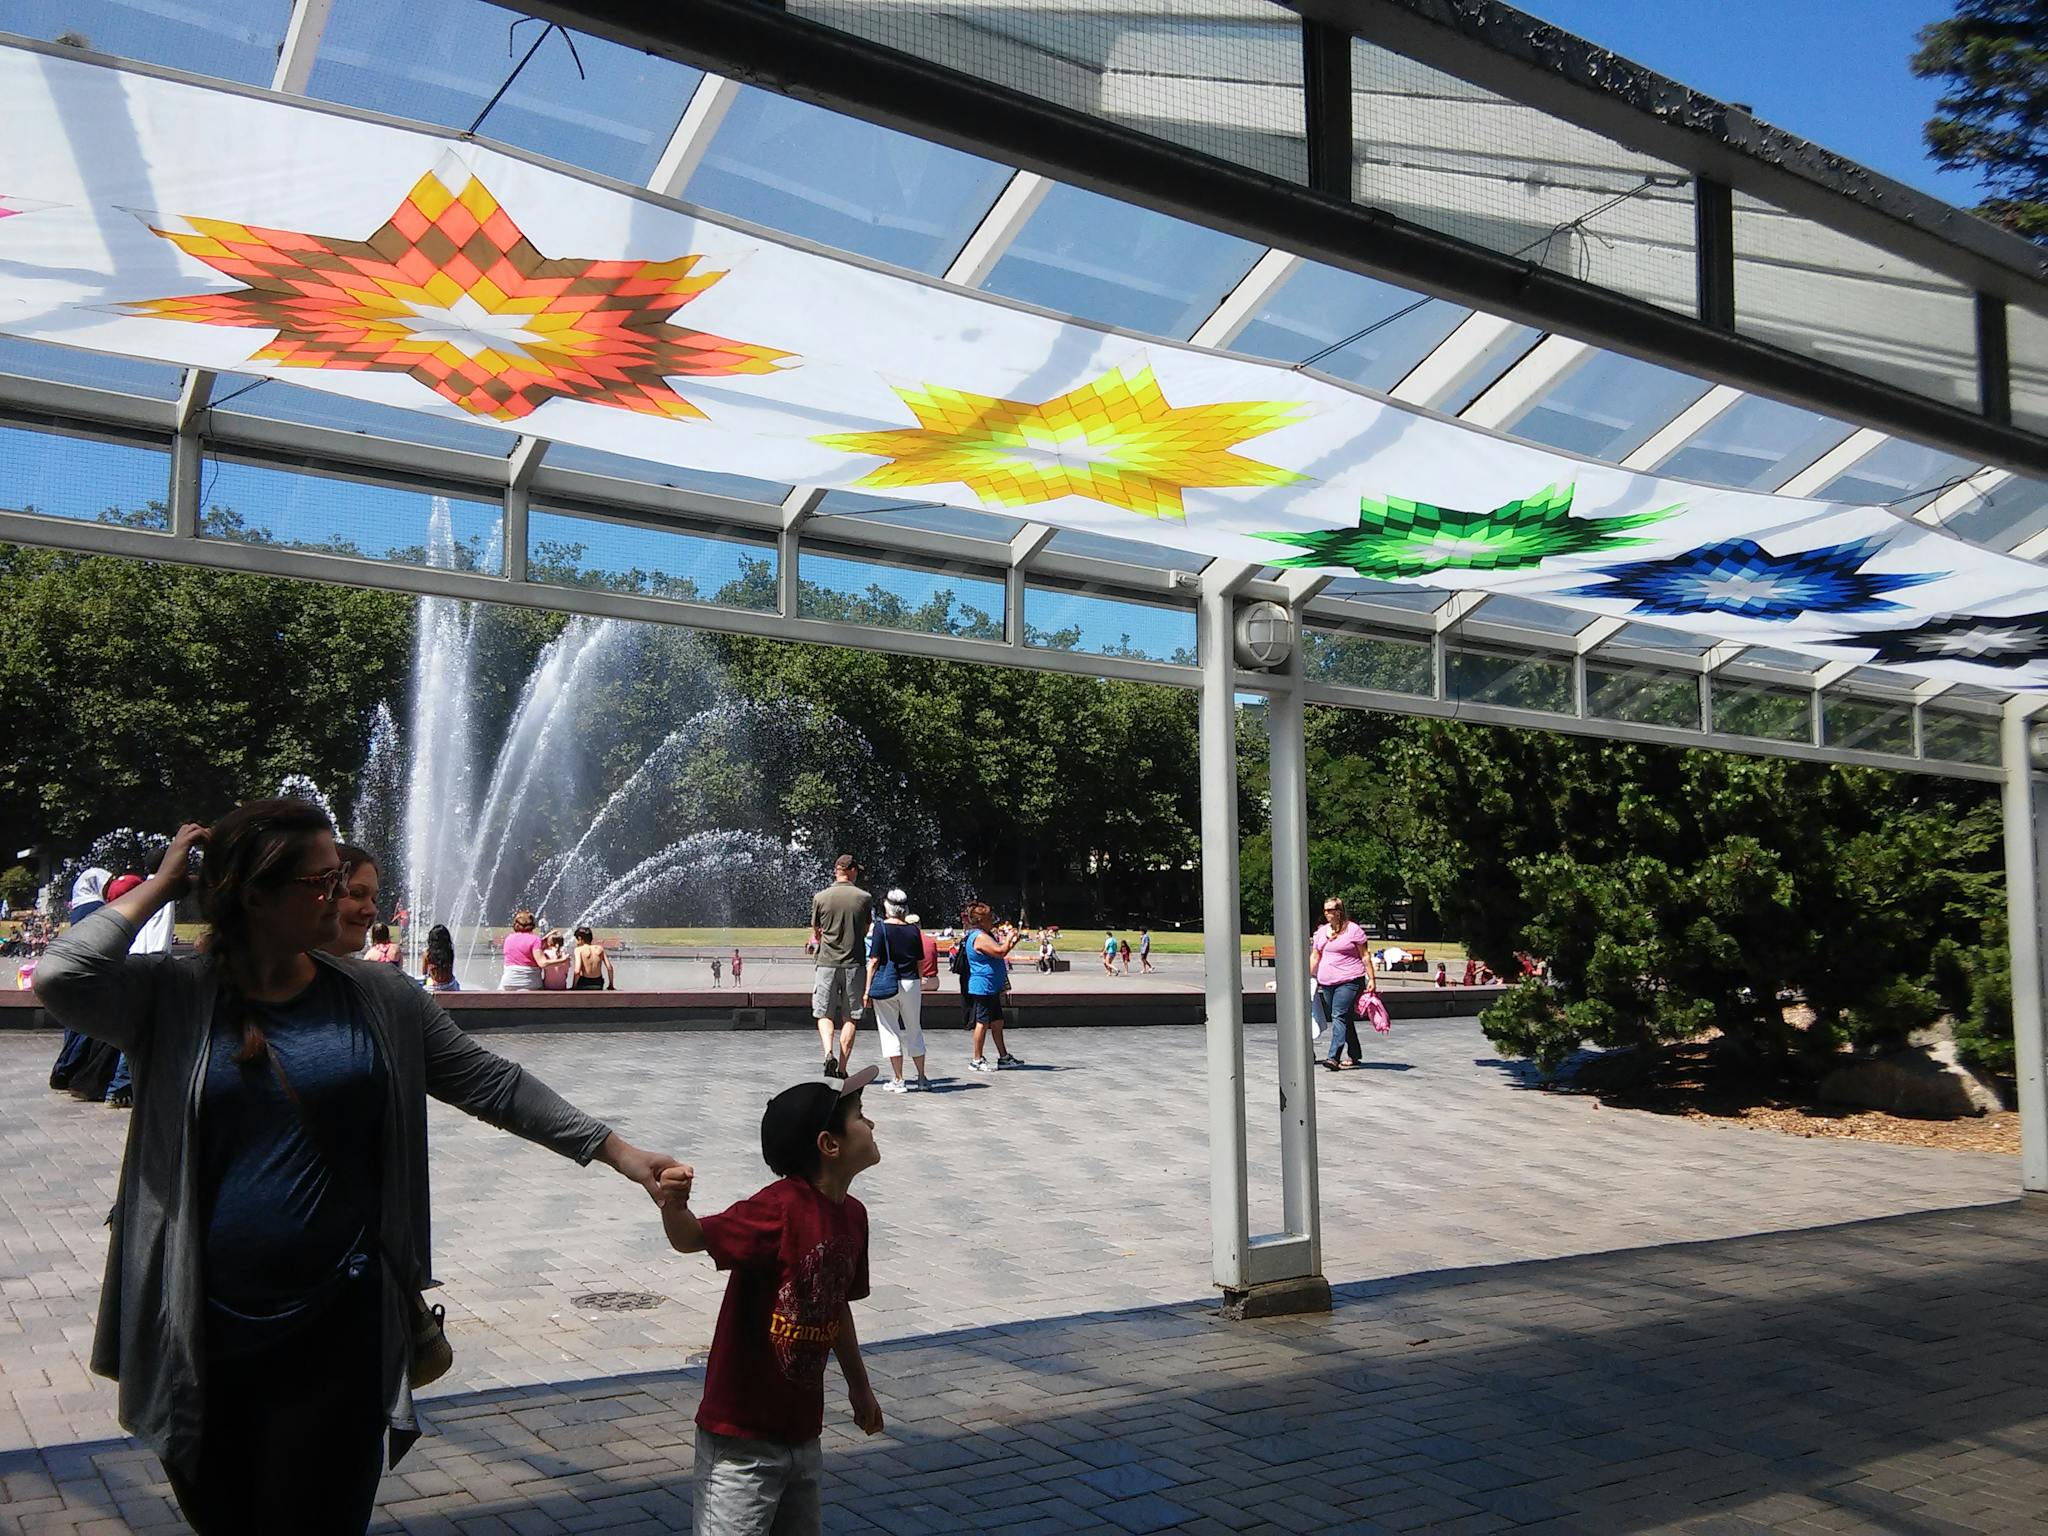 Visitors gather near a colorful, overhanging banner, while a fountain stands in the background.